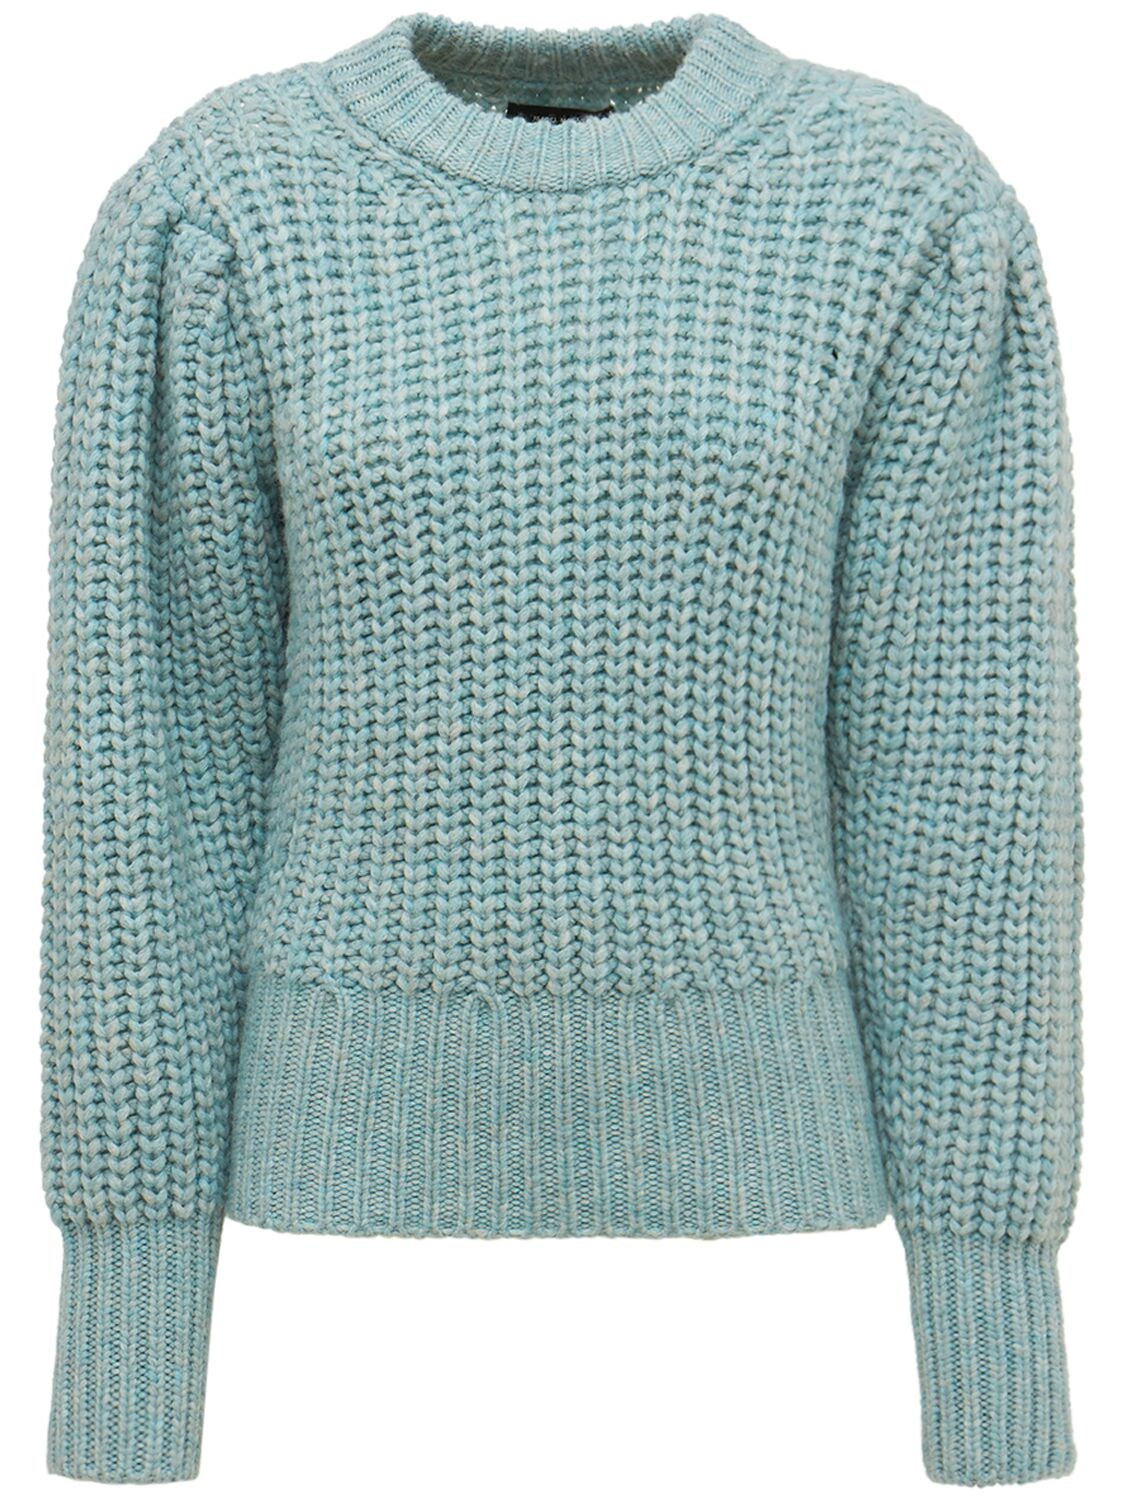 ISABEL MARANT Pacey Wool Blend Knit Sweater